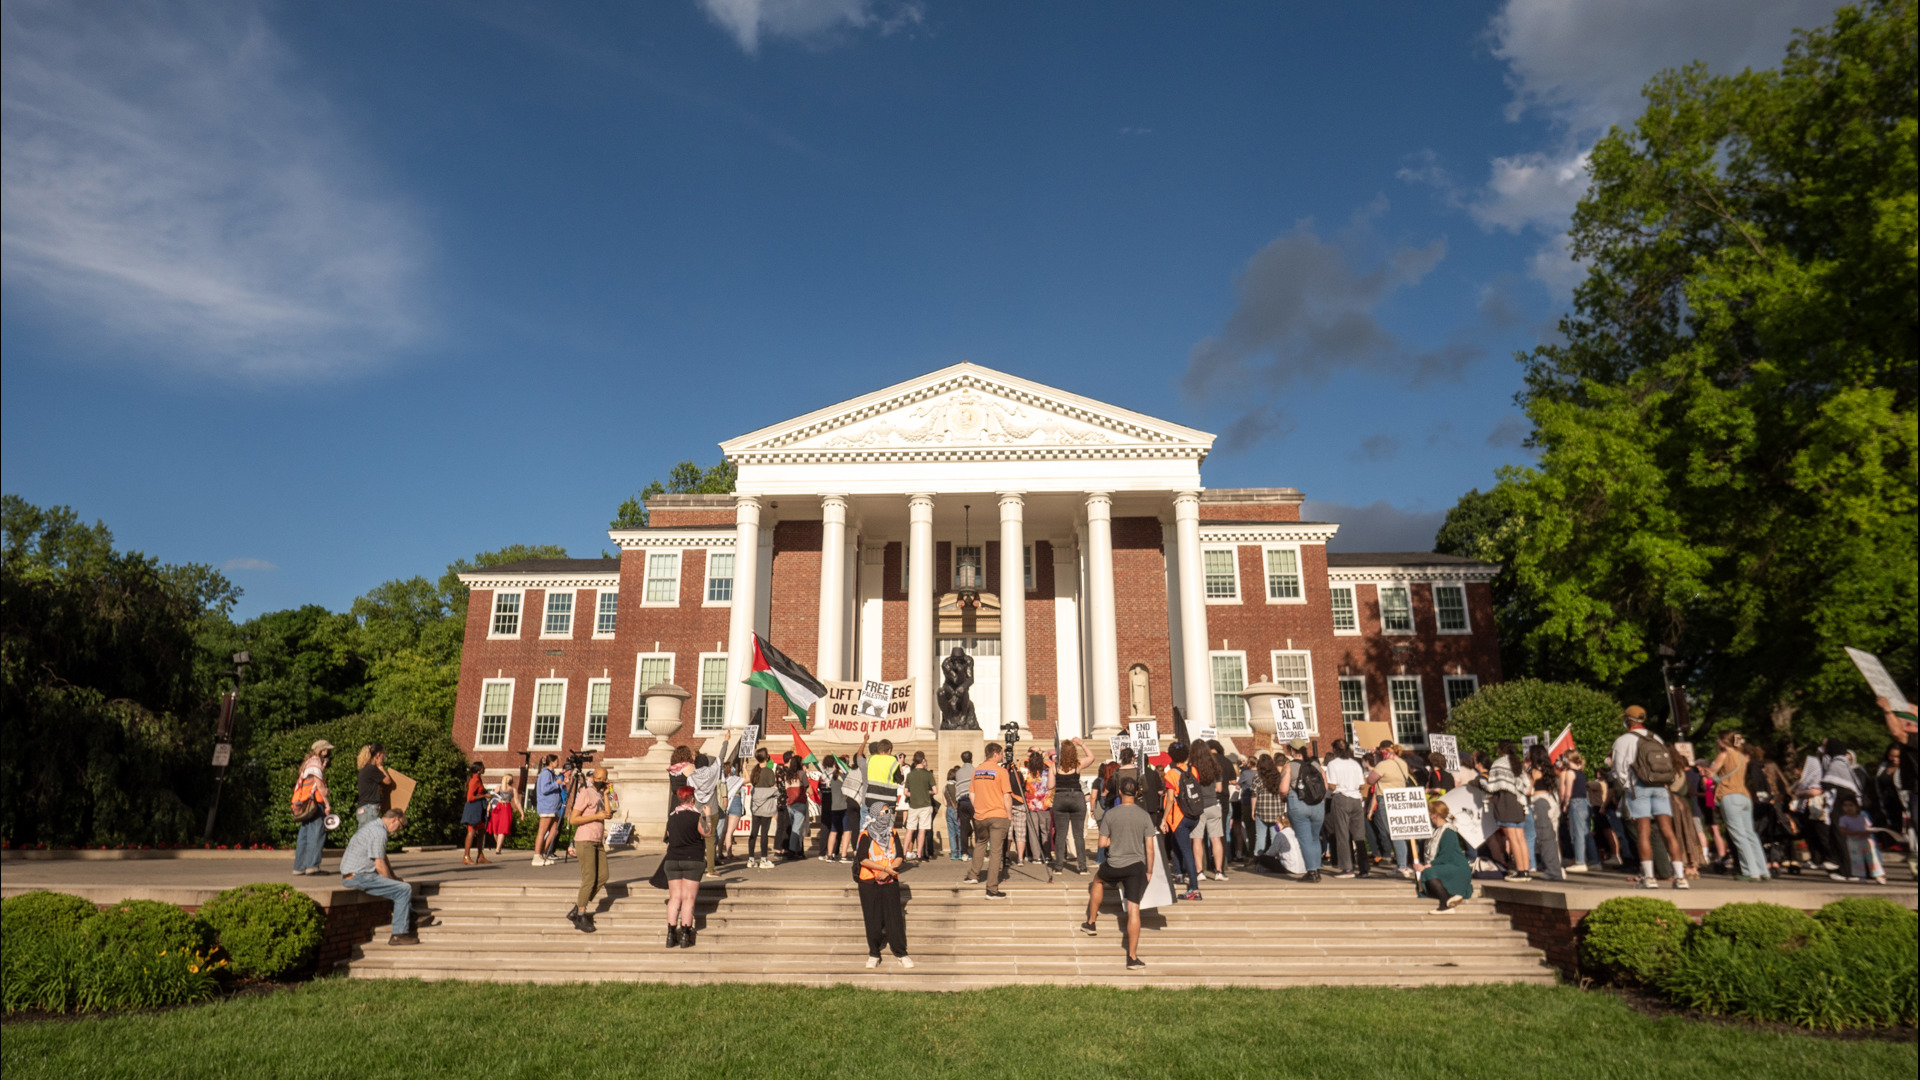 More than 100 students attended the rally and march speaking out against the war in Gaza.